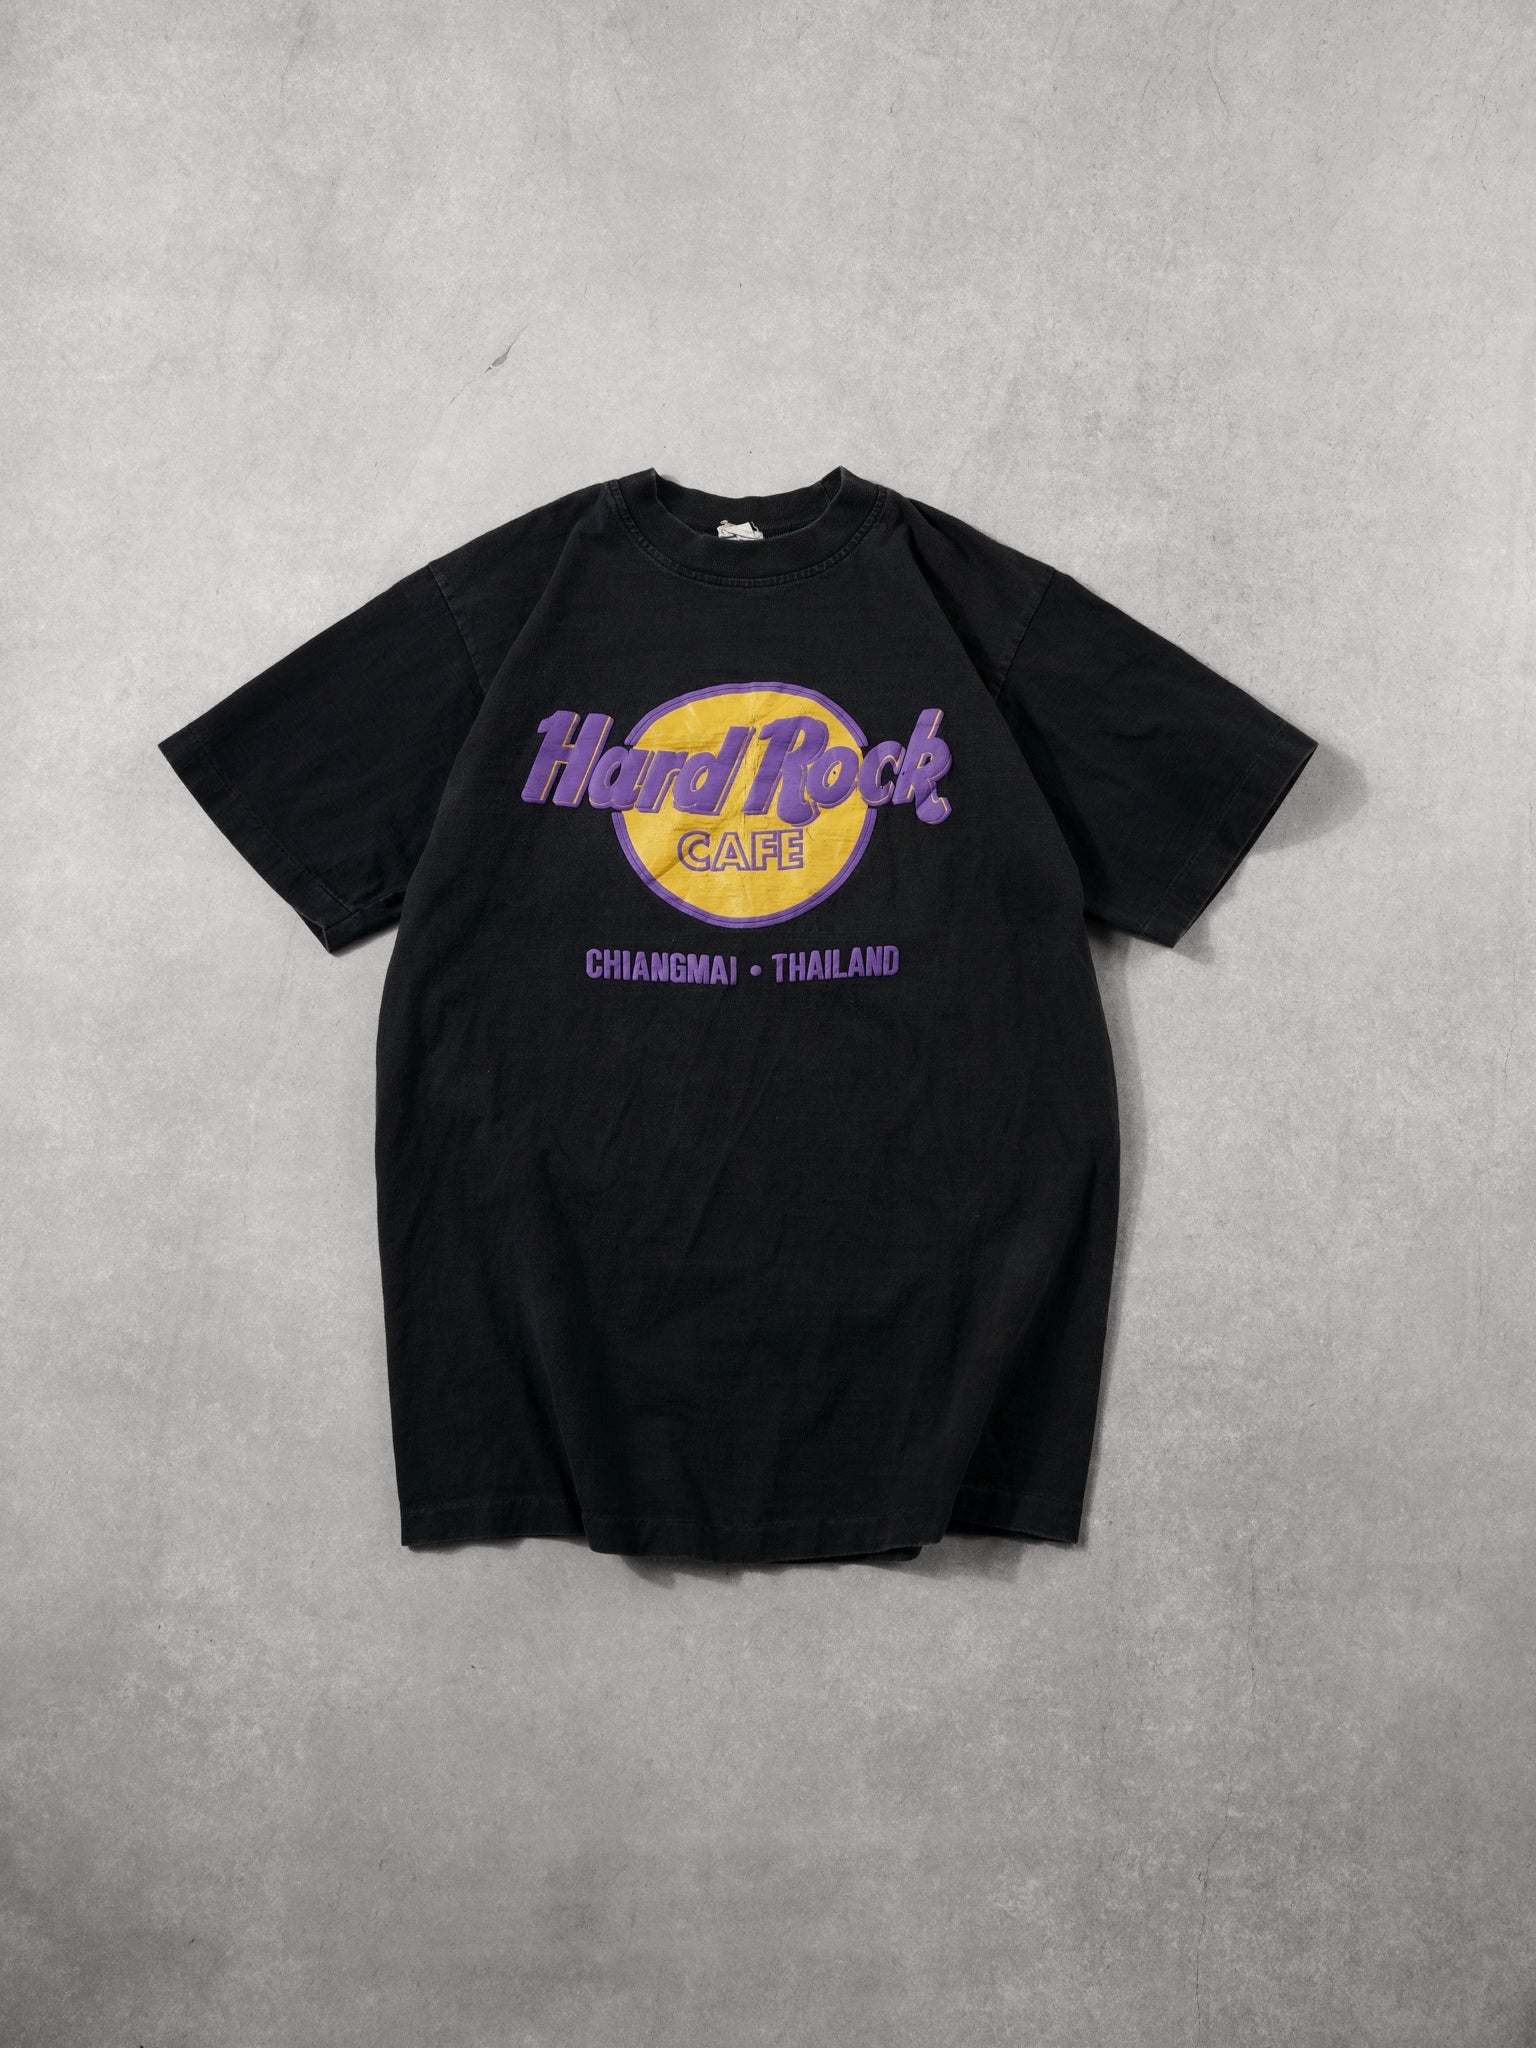 Vintage 90s Black, Purple and Yellow Hard Rock Cafe Chaingmai Thailand Single Stitched Tee (S)